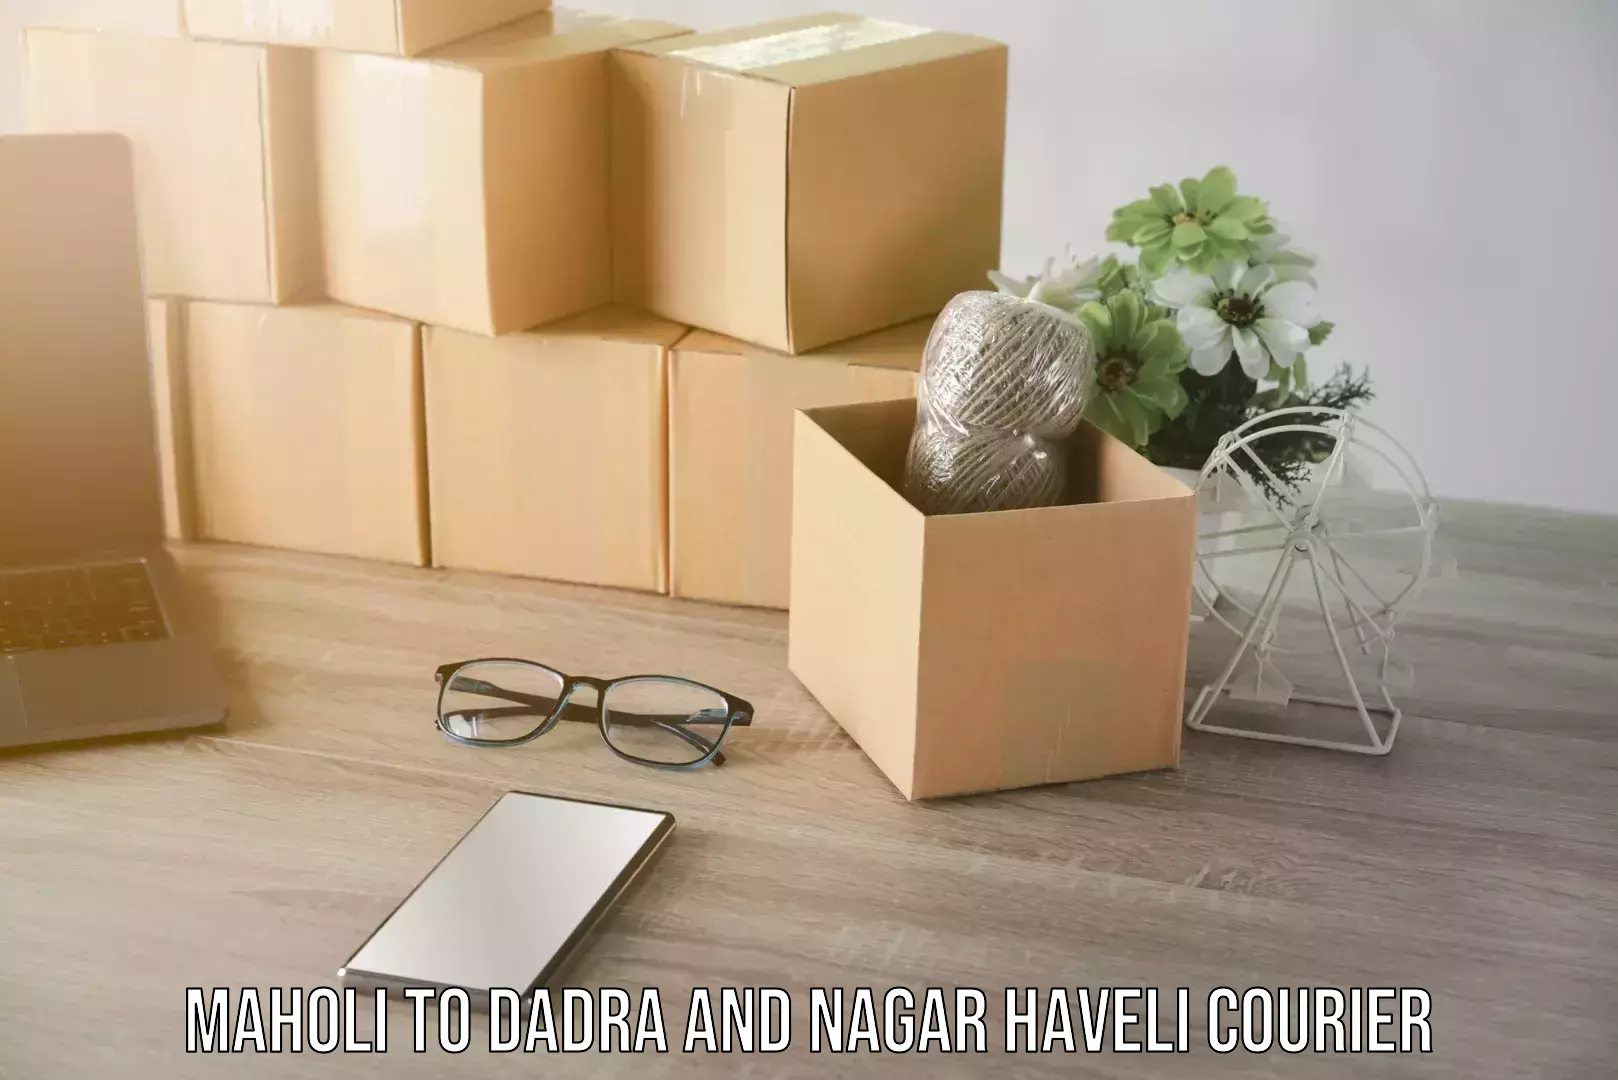 Trusted relocation experts Maholi to Dadra and Nagar Haveli